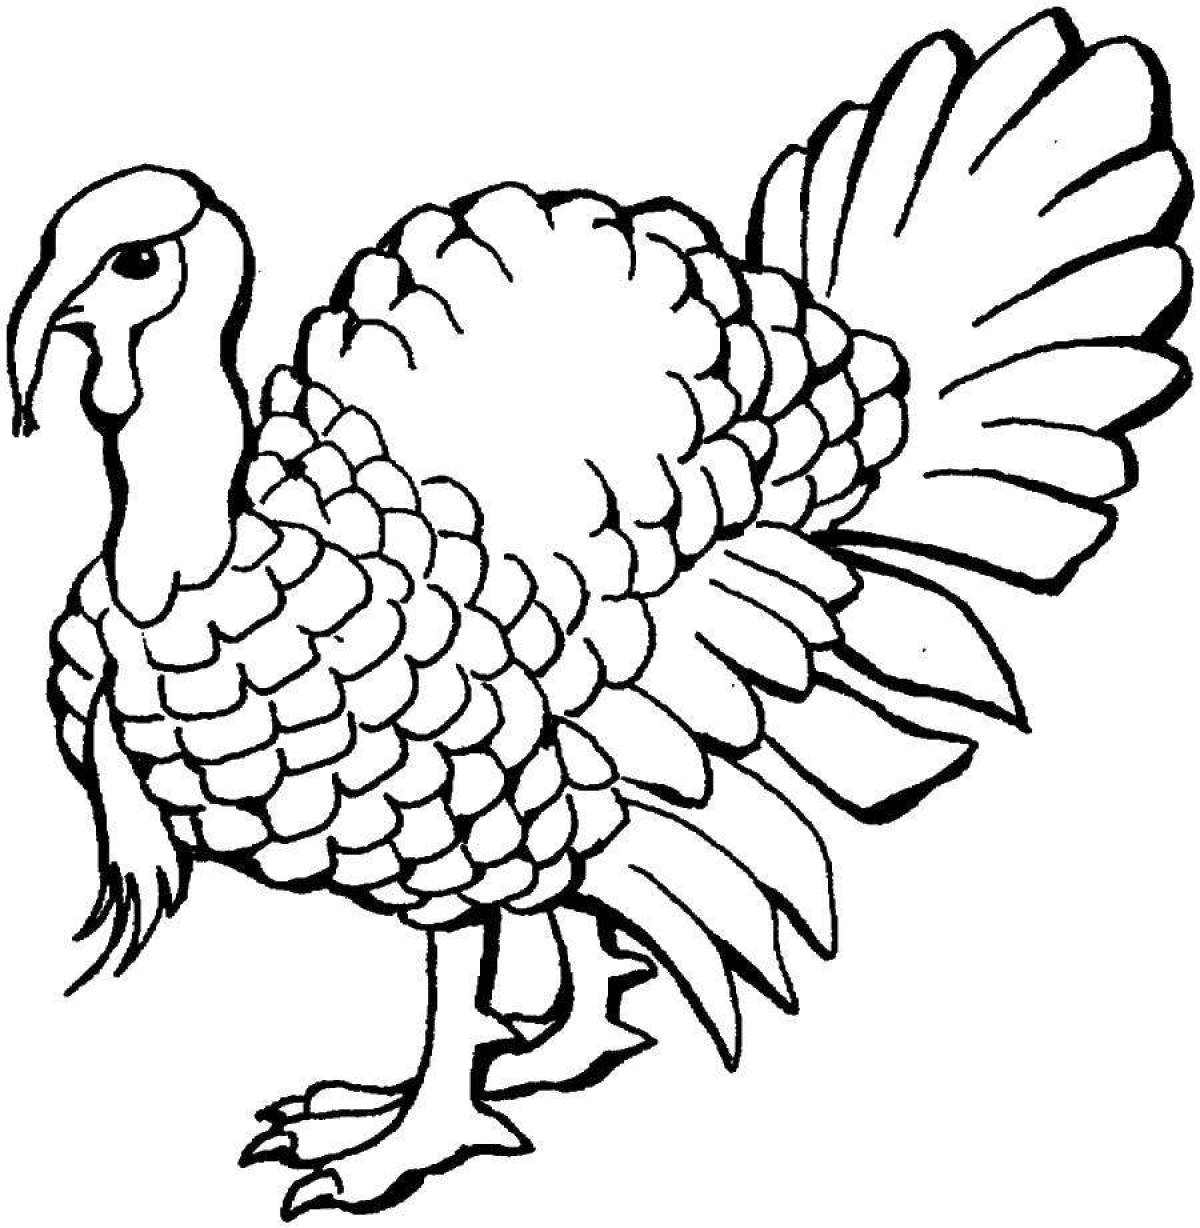 Funny poultry coloring page